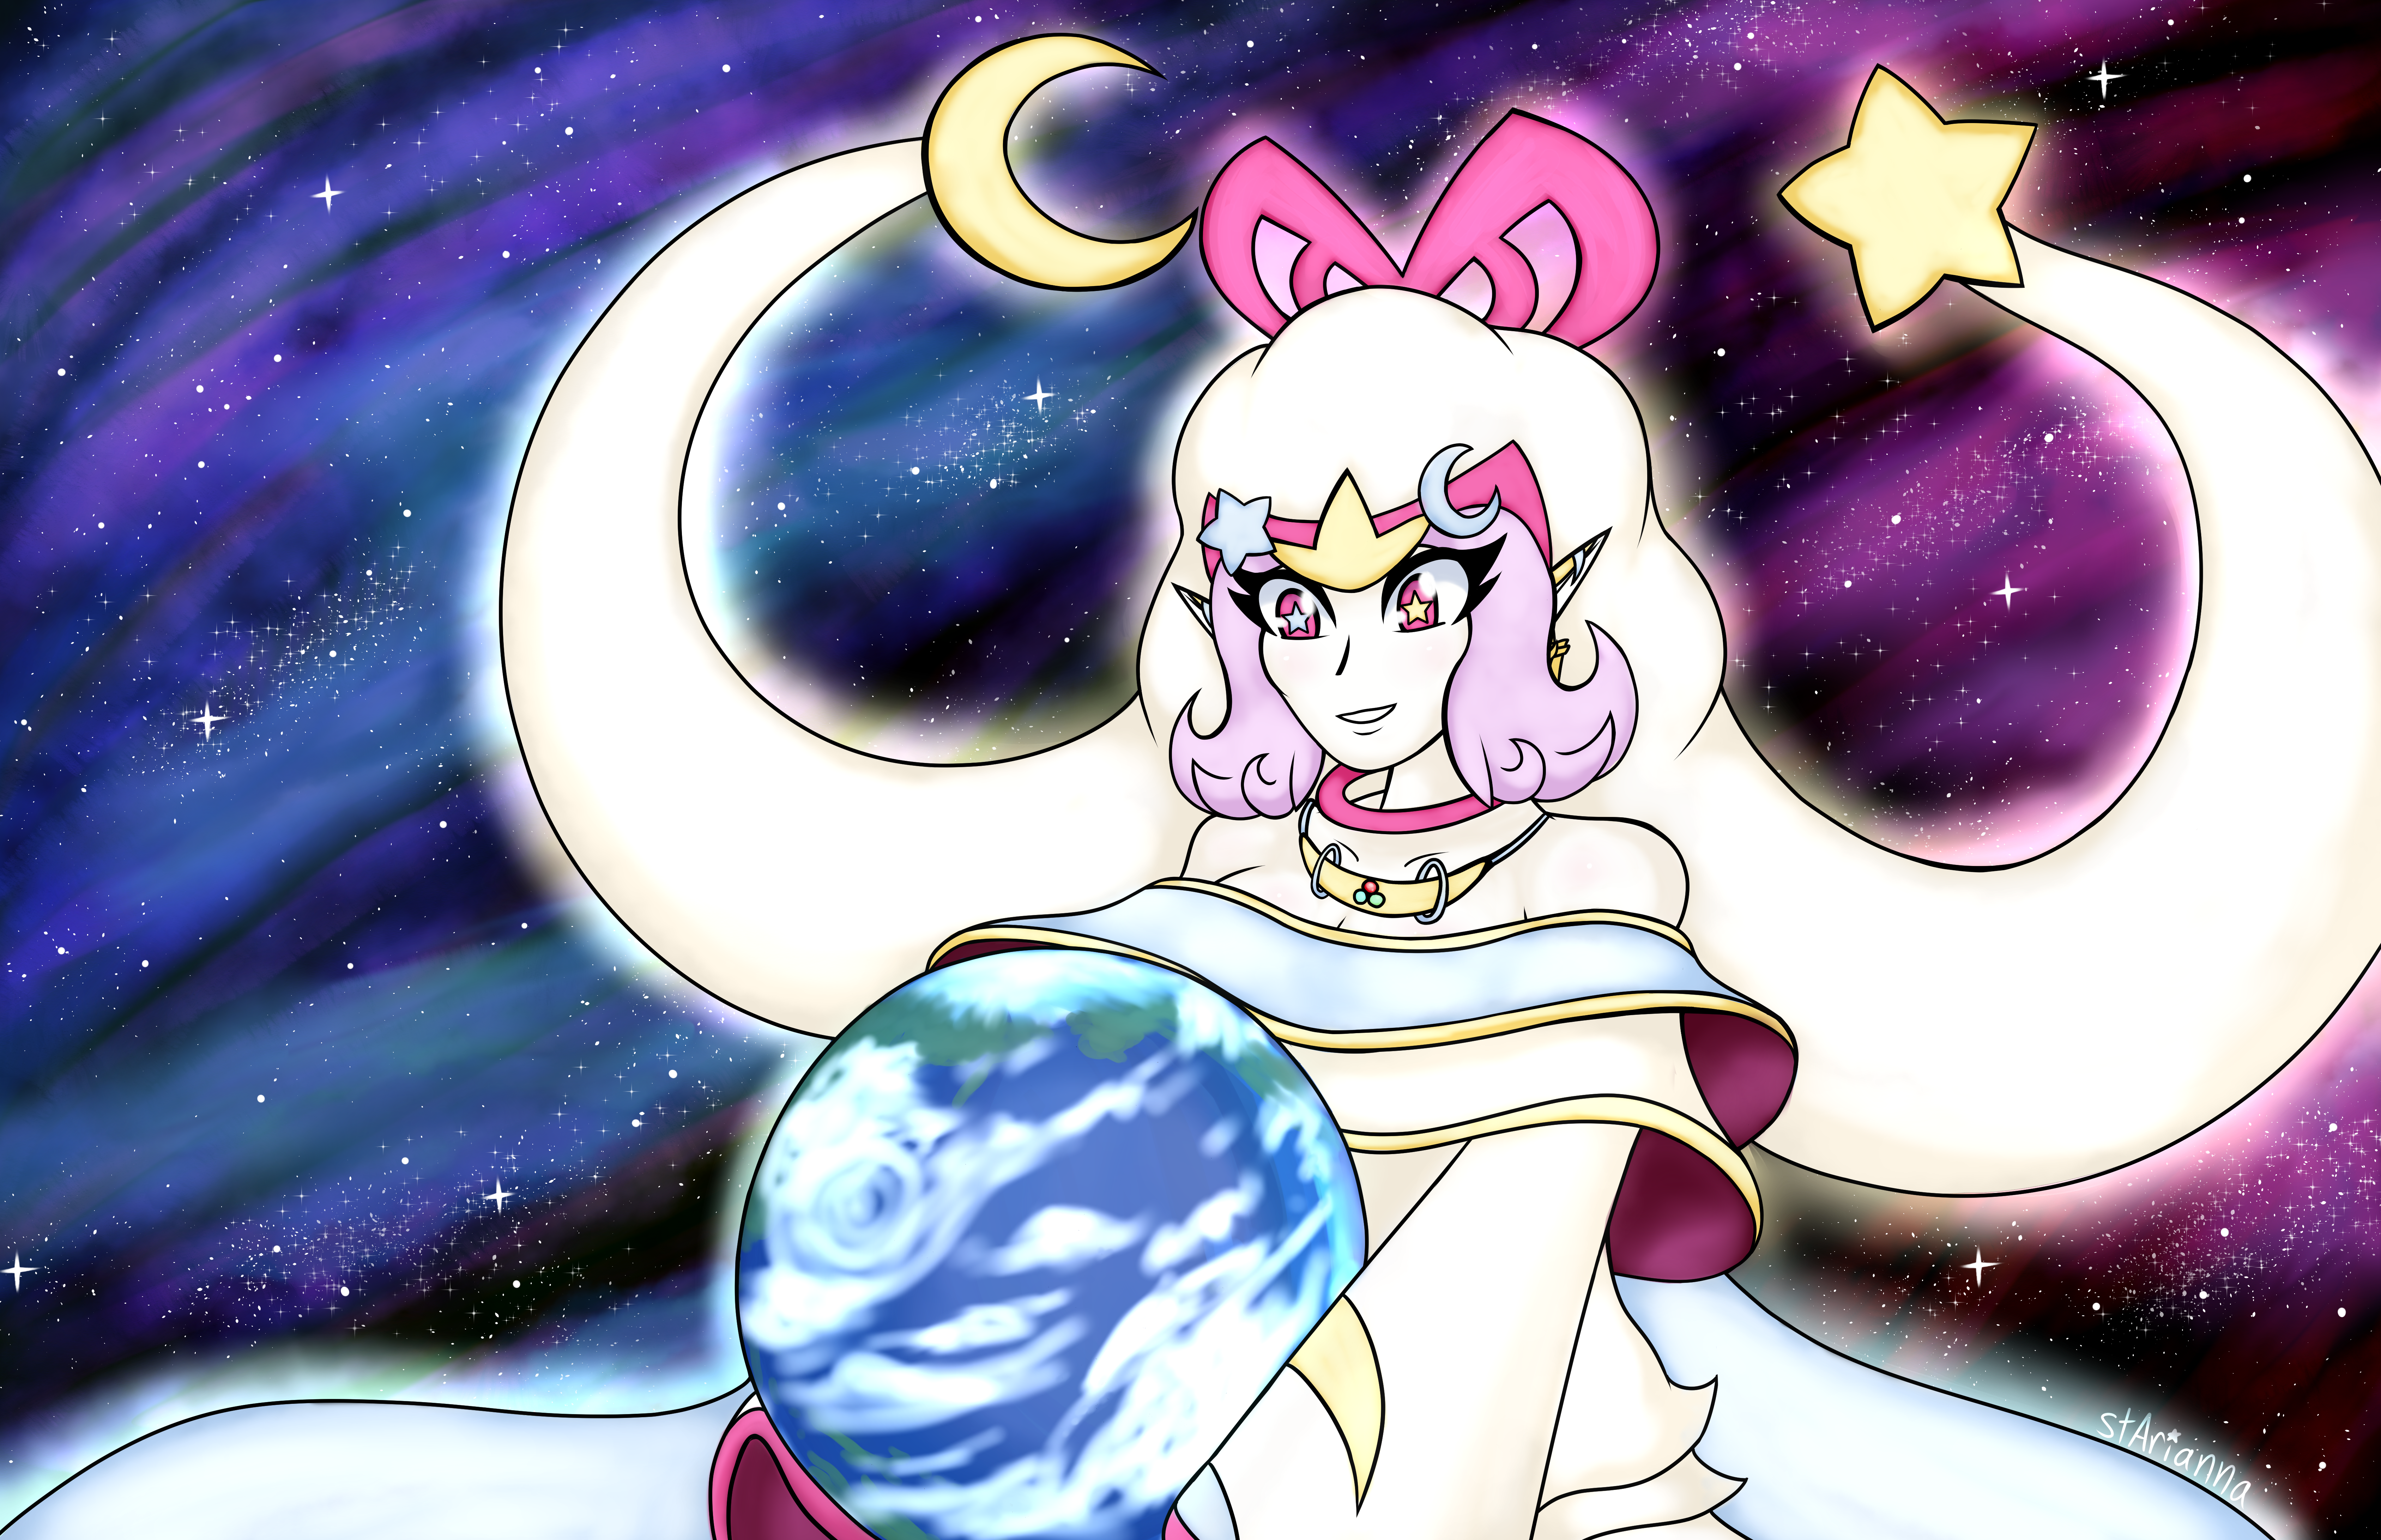 GrandCelesmy, the goddess of Monommy, the Grand Mother, overlooks a planet as she drifts in the cosmic sea